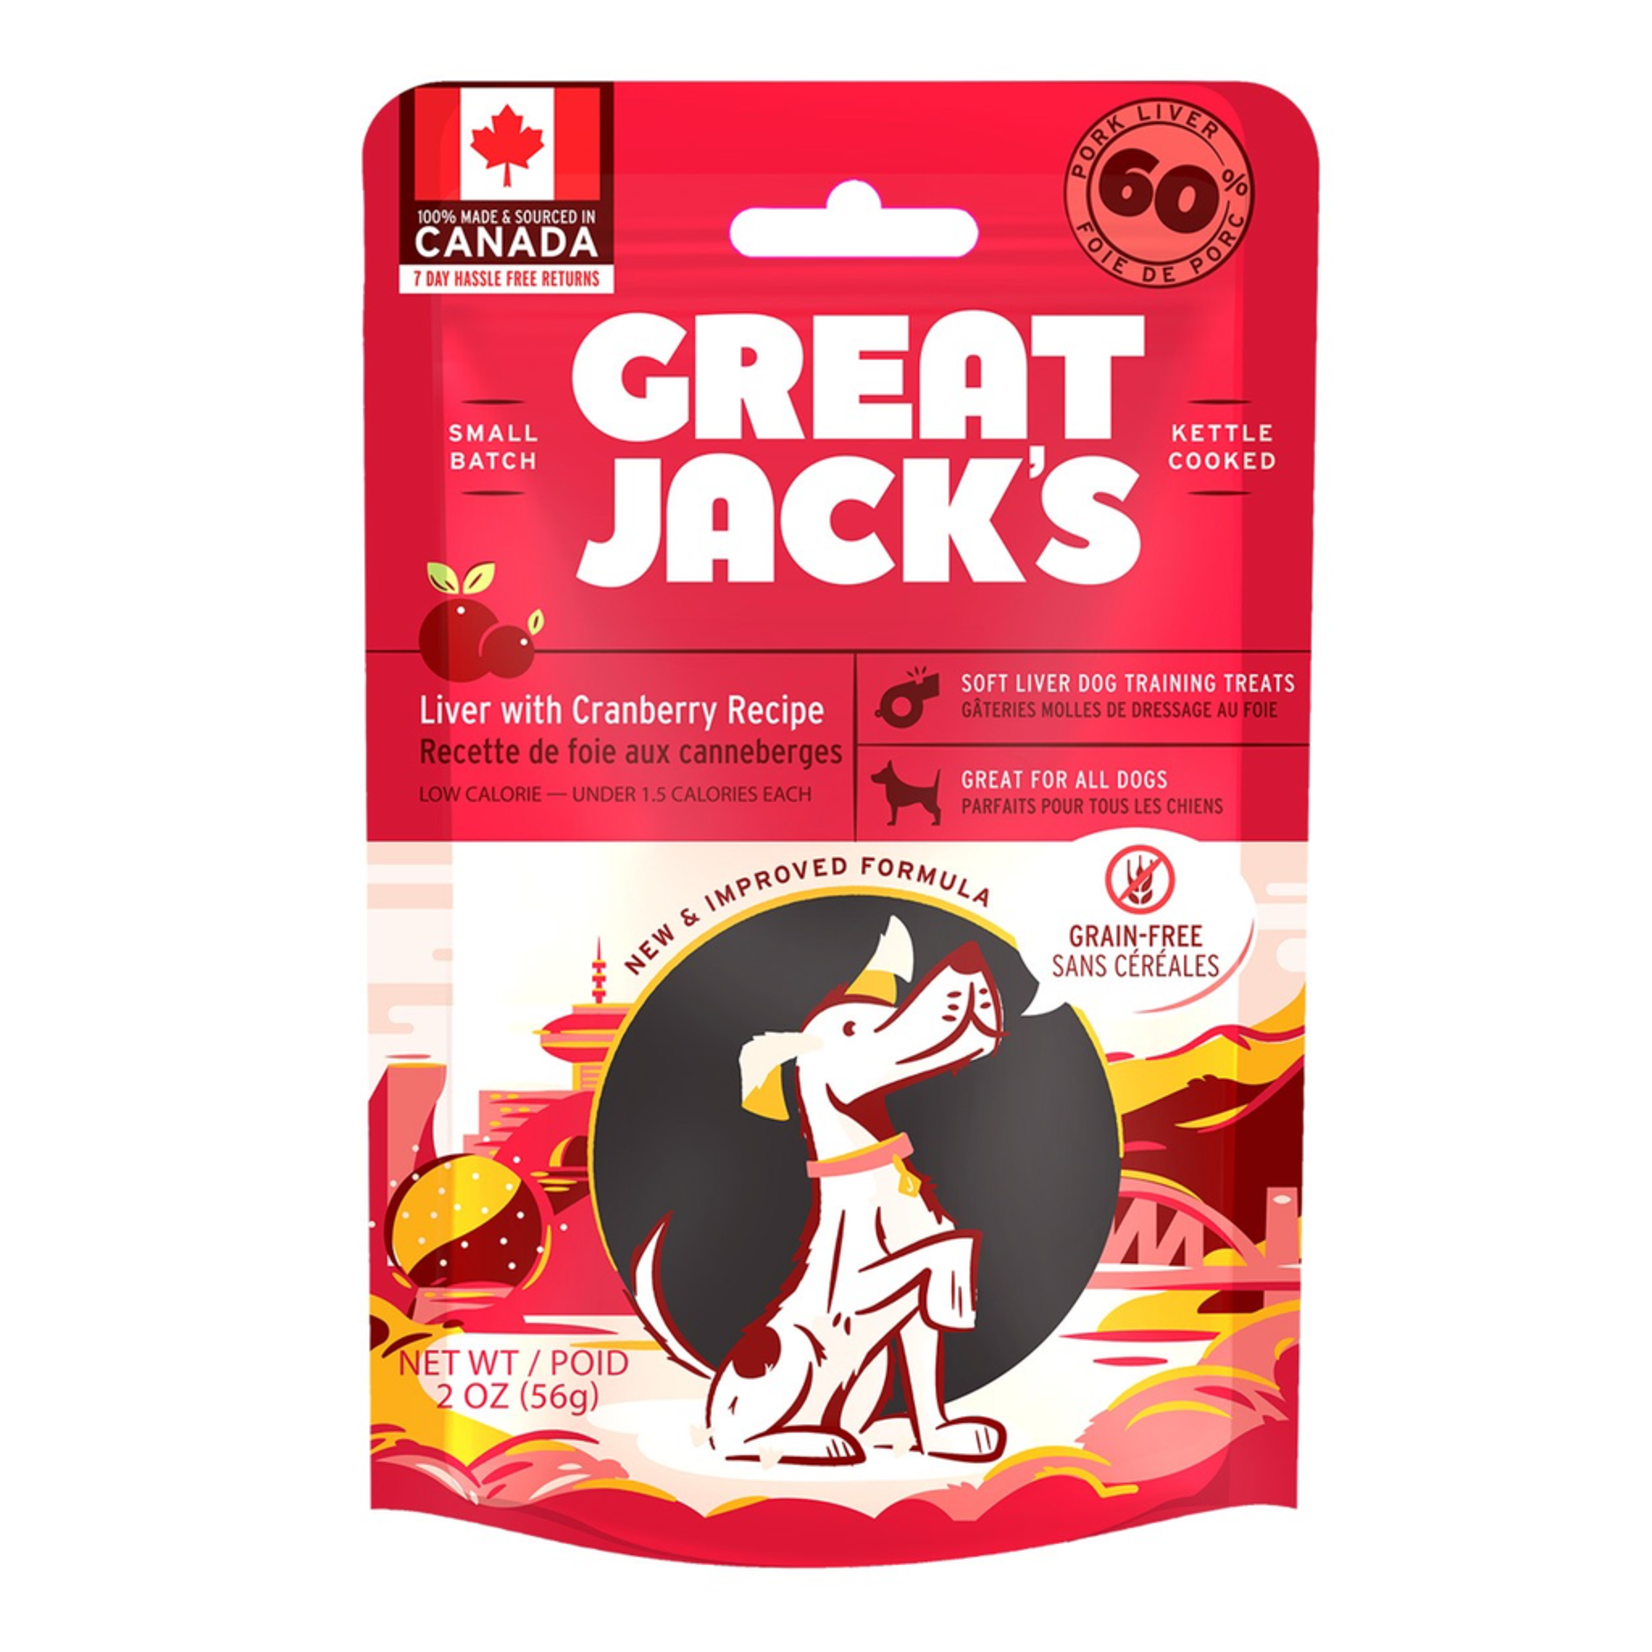 GREAT JACK'S Great Jack's Grain-Free Soft Liver Dog Training Treats - Liver with Cranberry Recipe - 56 g